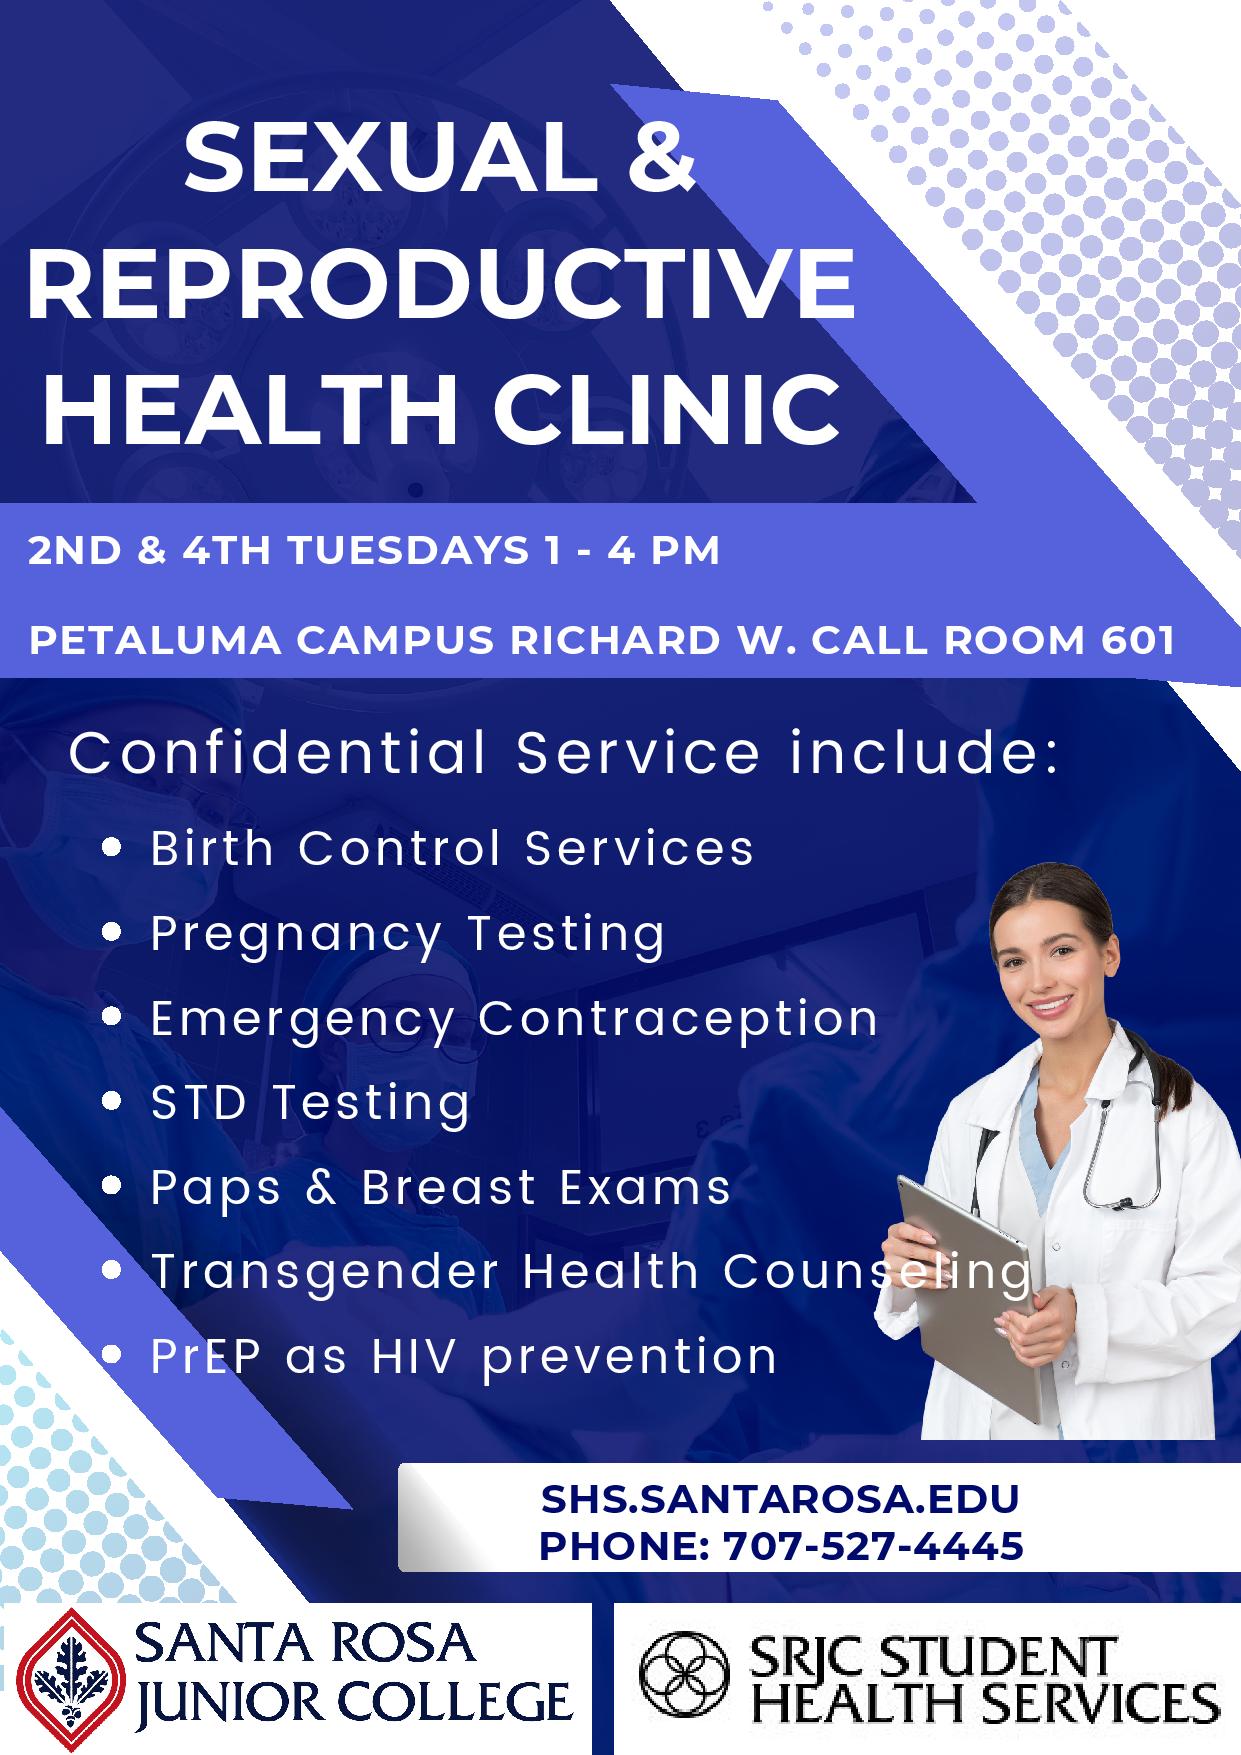 Sexual and reproductive health clinic, 2nd and 4th Tuesdays, 1 to 4 PM on the Petaluma Campus. Confidential services include birth control services, pregnancy testing, emergency contraception, STD testing, Paps and breast exams, transgender health, PrEP as HIV prevention. visit shs.santarosa.edu or call 7075274445 for more information